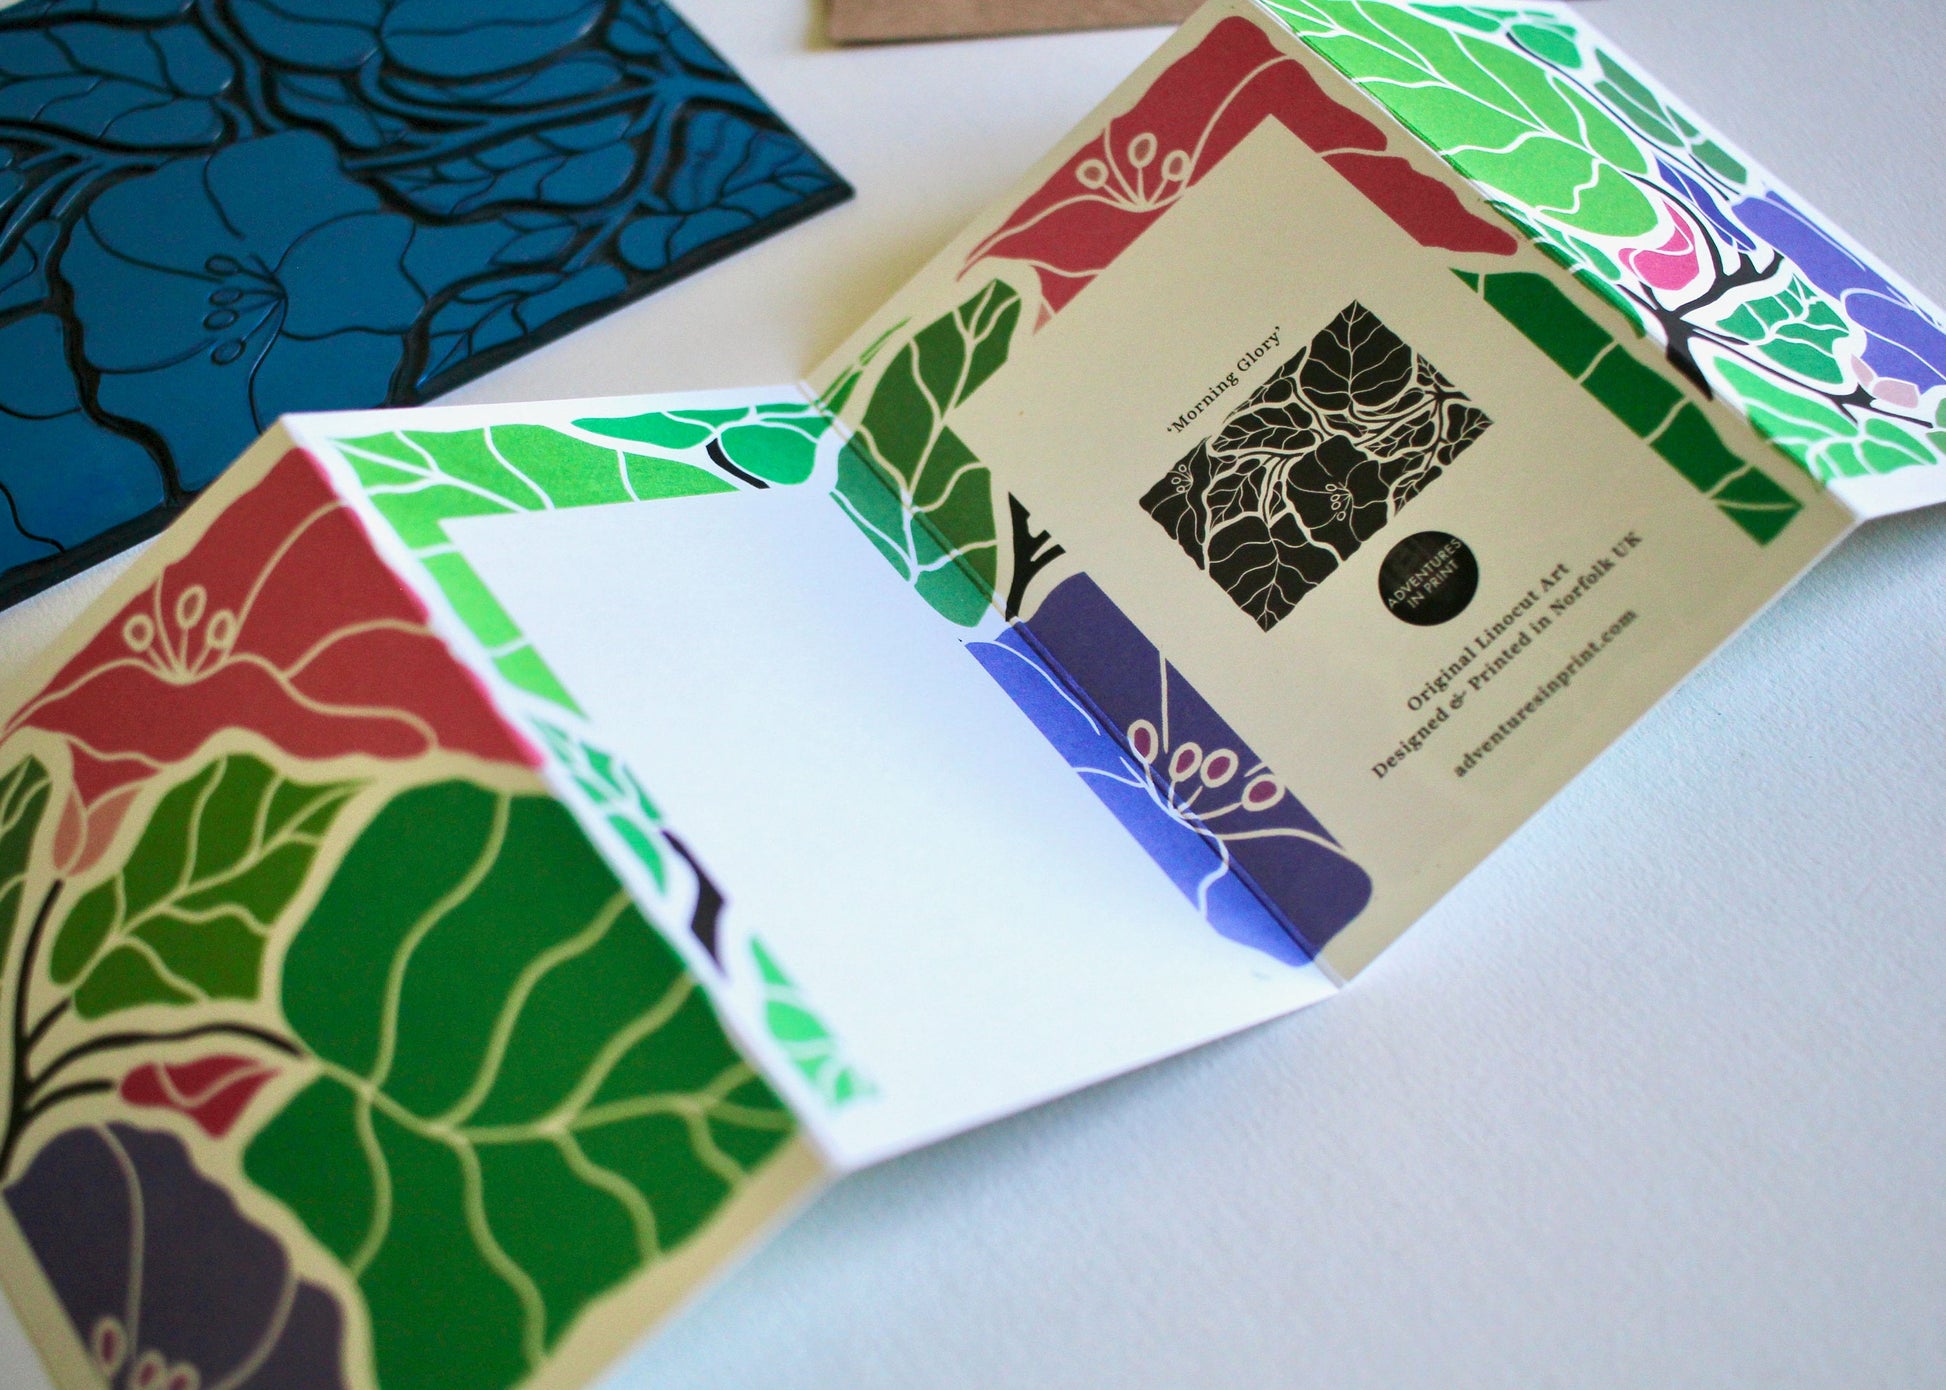 A linocut concertina greeting card carefully printed in small batches and folded by hand